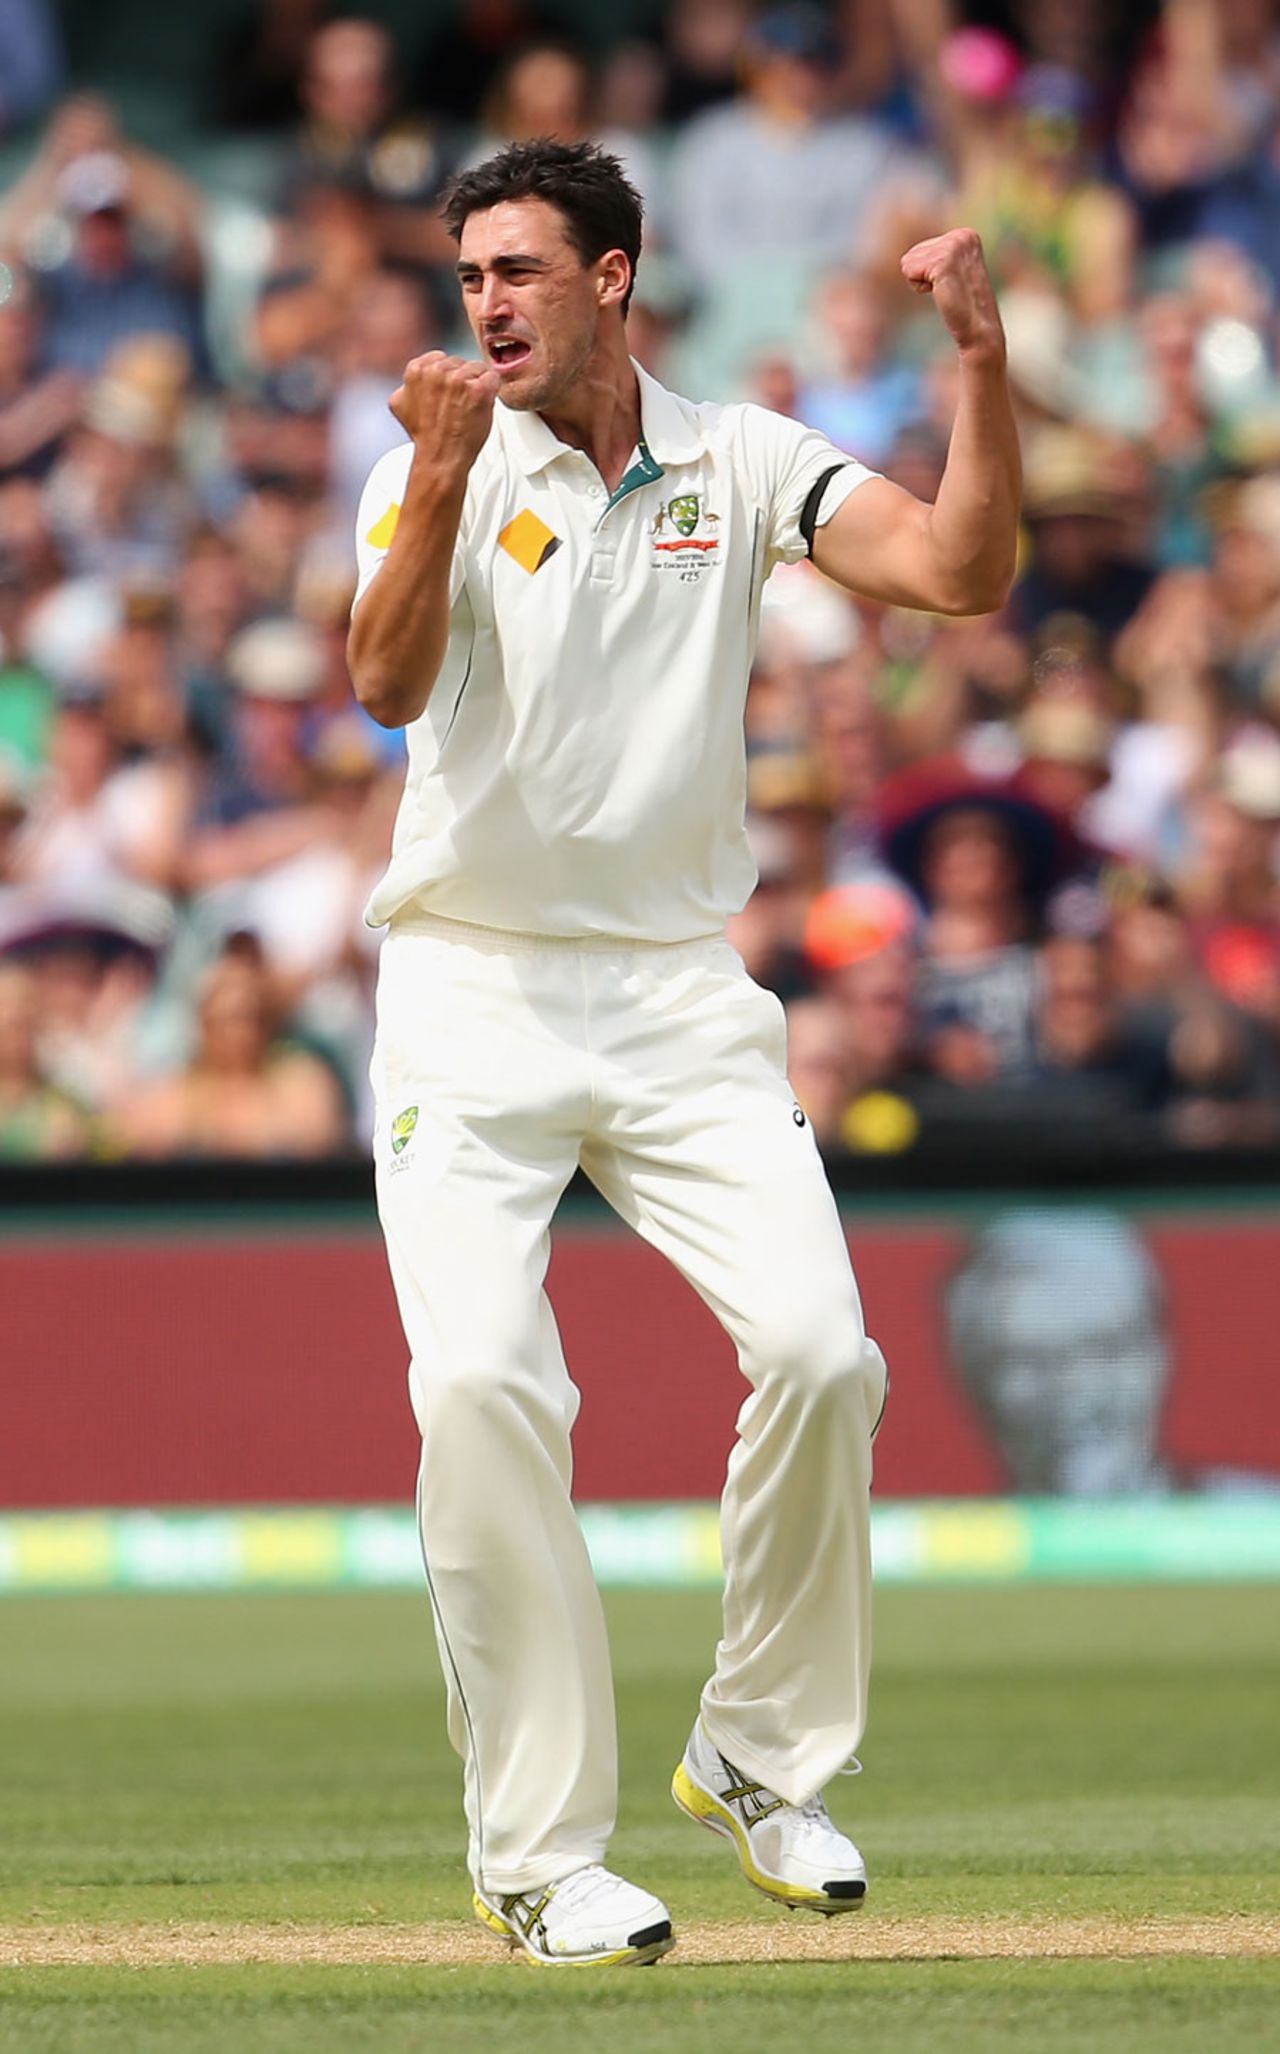 Mitchell Starc removed Kane Williamson with a yorker, Australia v New Zealand, 3rd Test, Adelaide, November 27, 2015